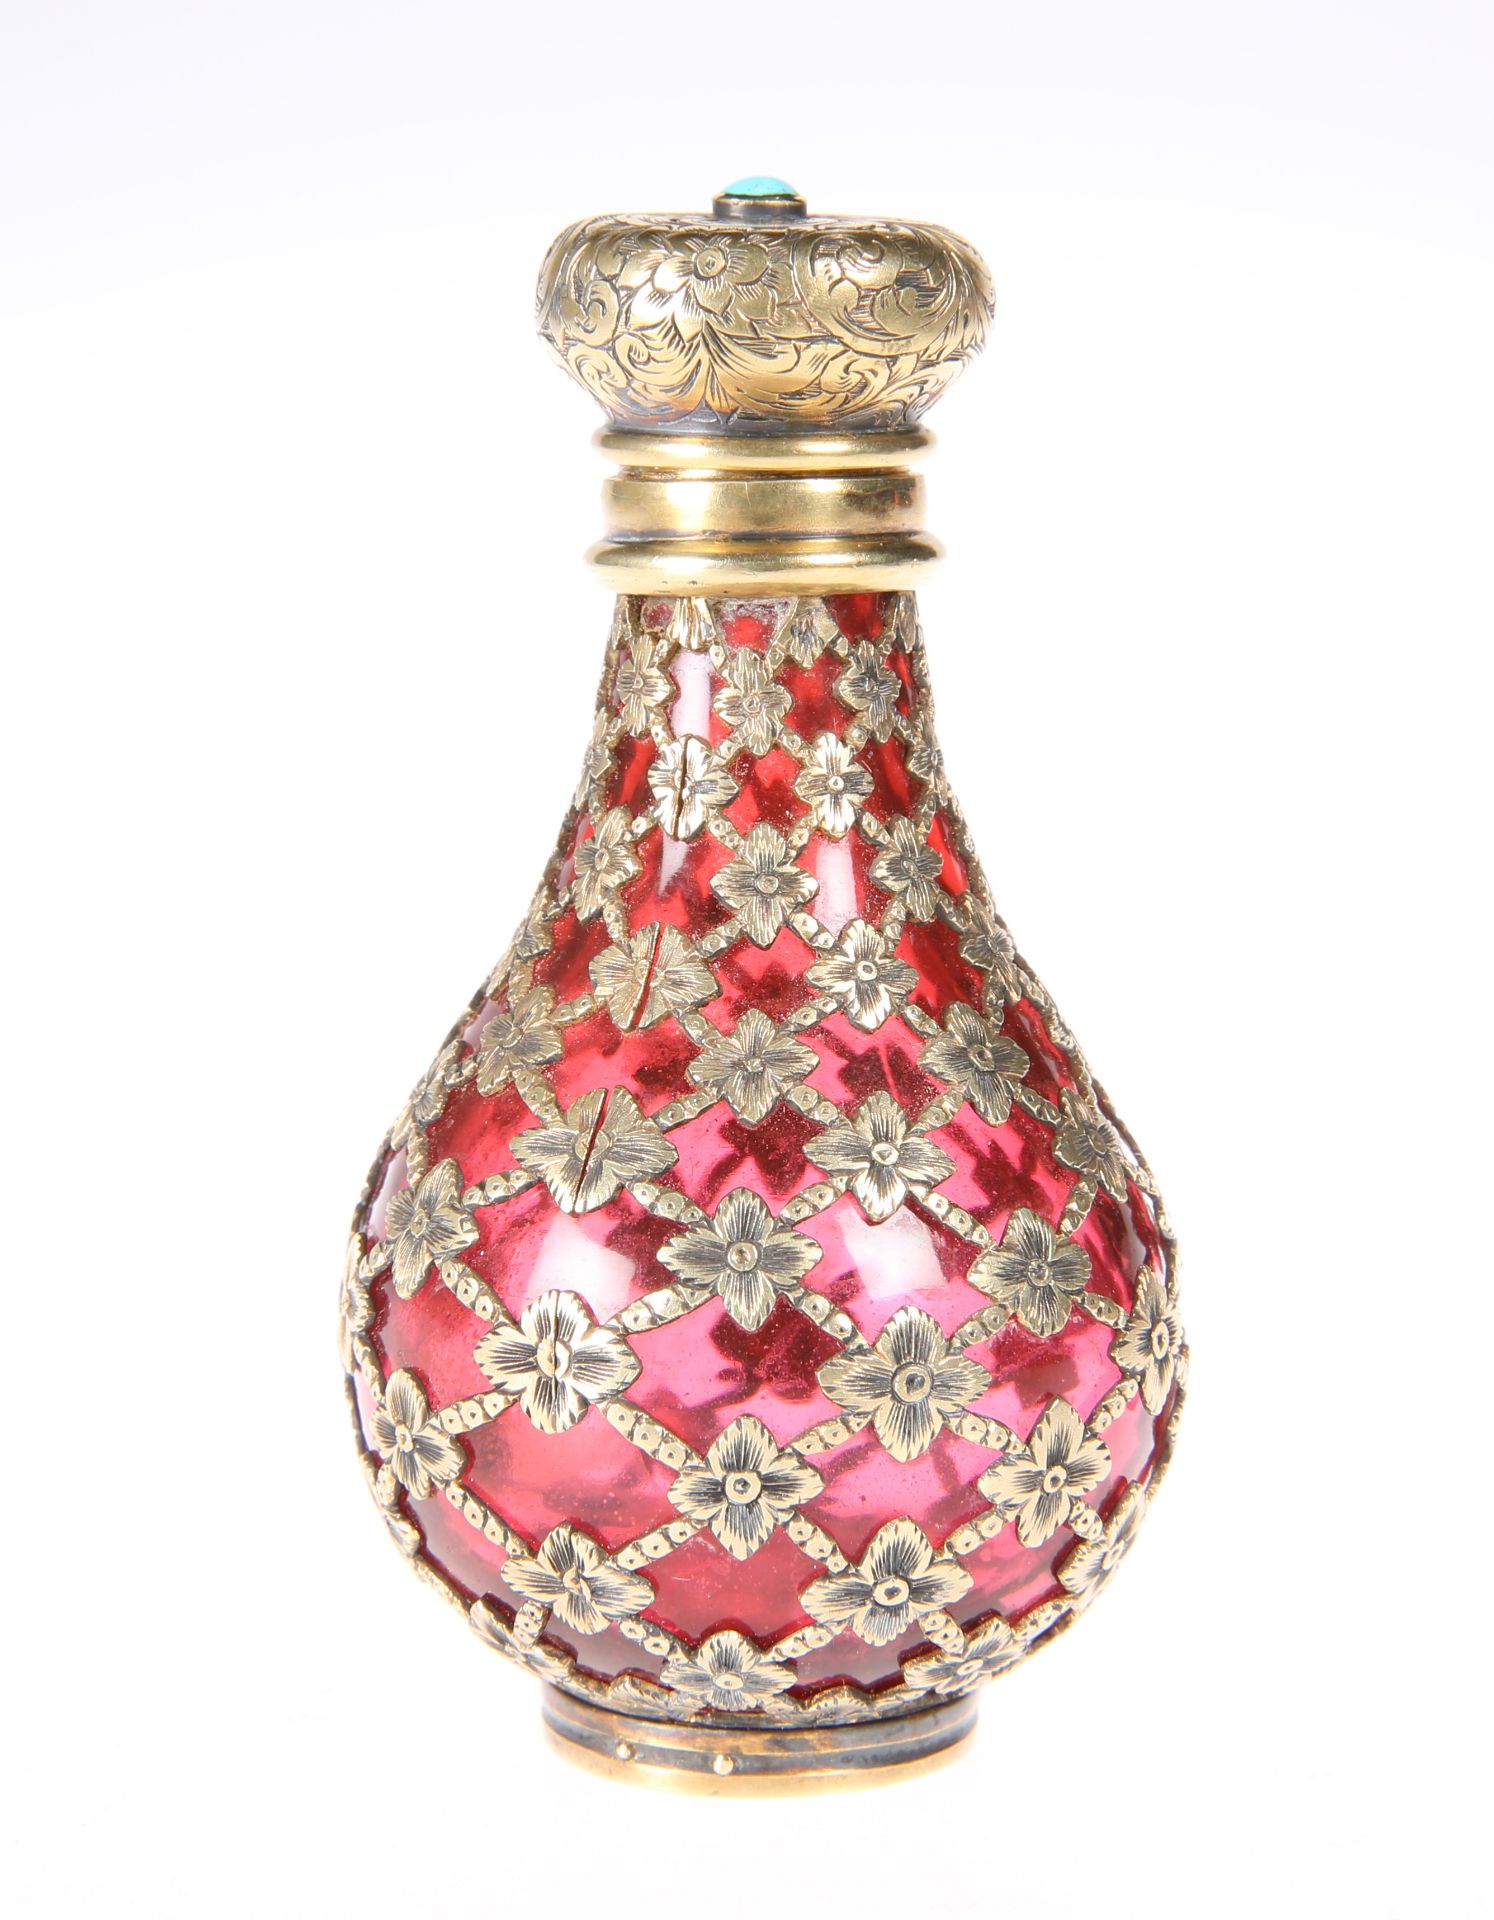 A VICTORIAN GILT-METAL MOUNTED CRANBERRY GLASS SCENT BOTTLE, the lattice overlay with flowerheads,